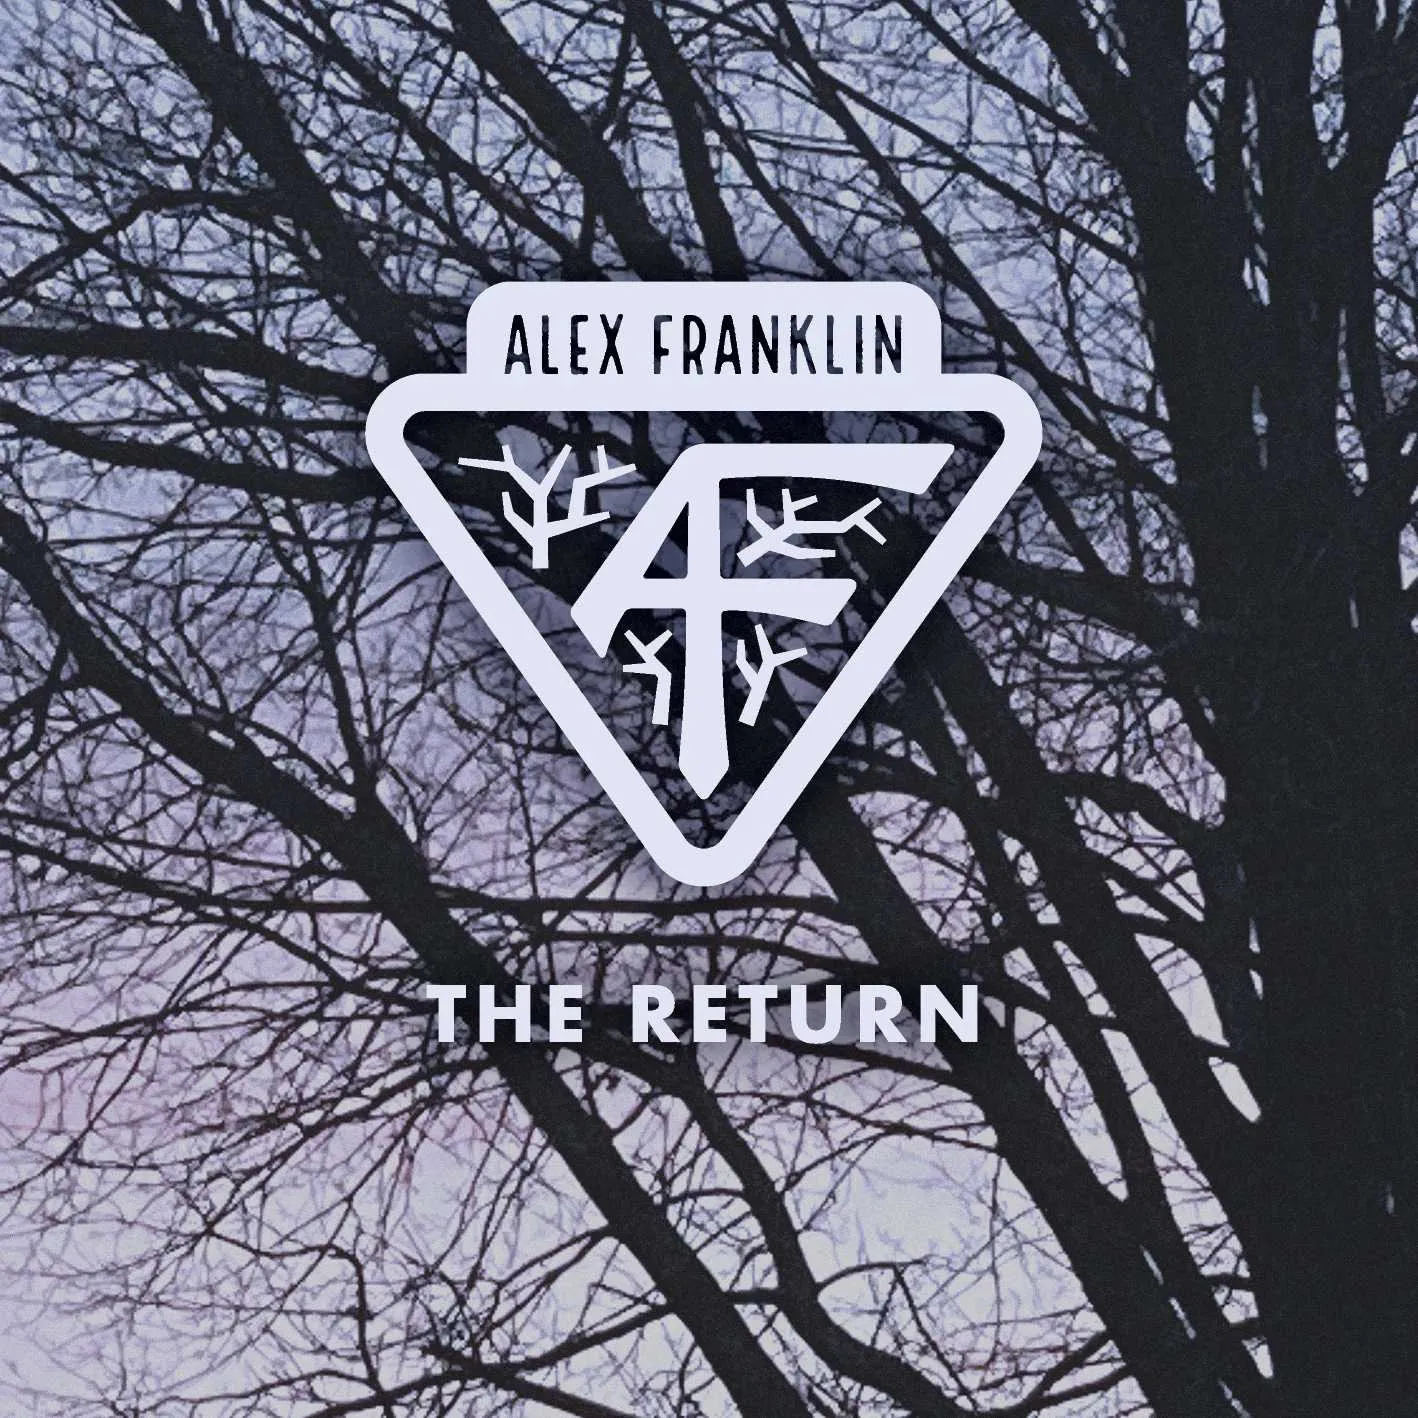 Album cover for “The Return” by Alex Franklin